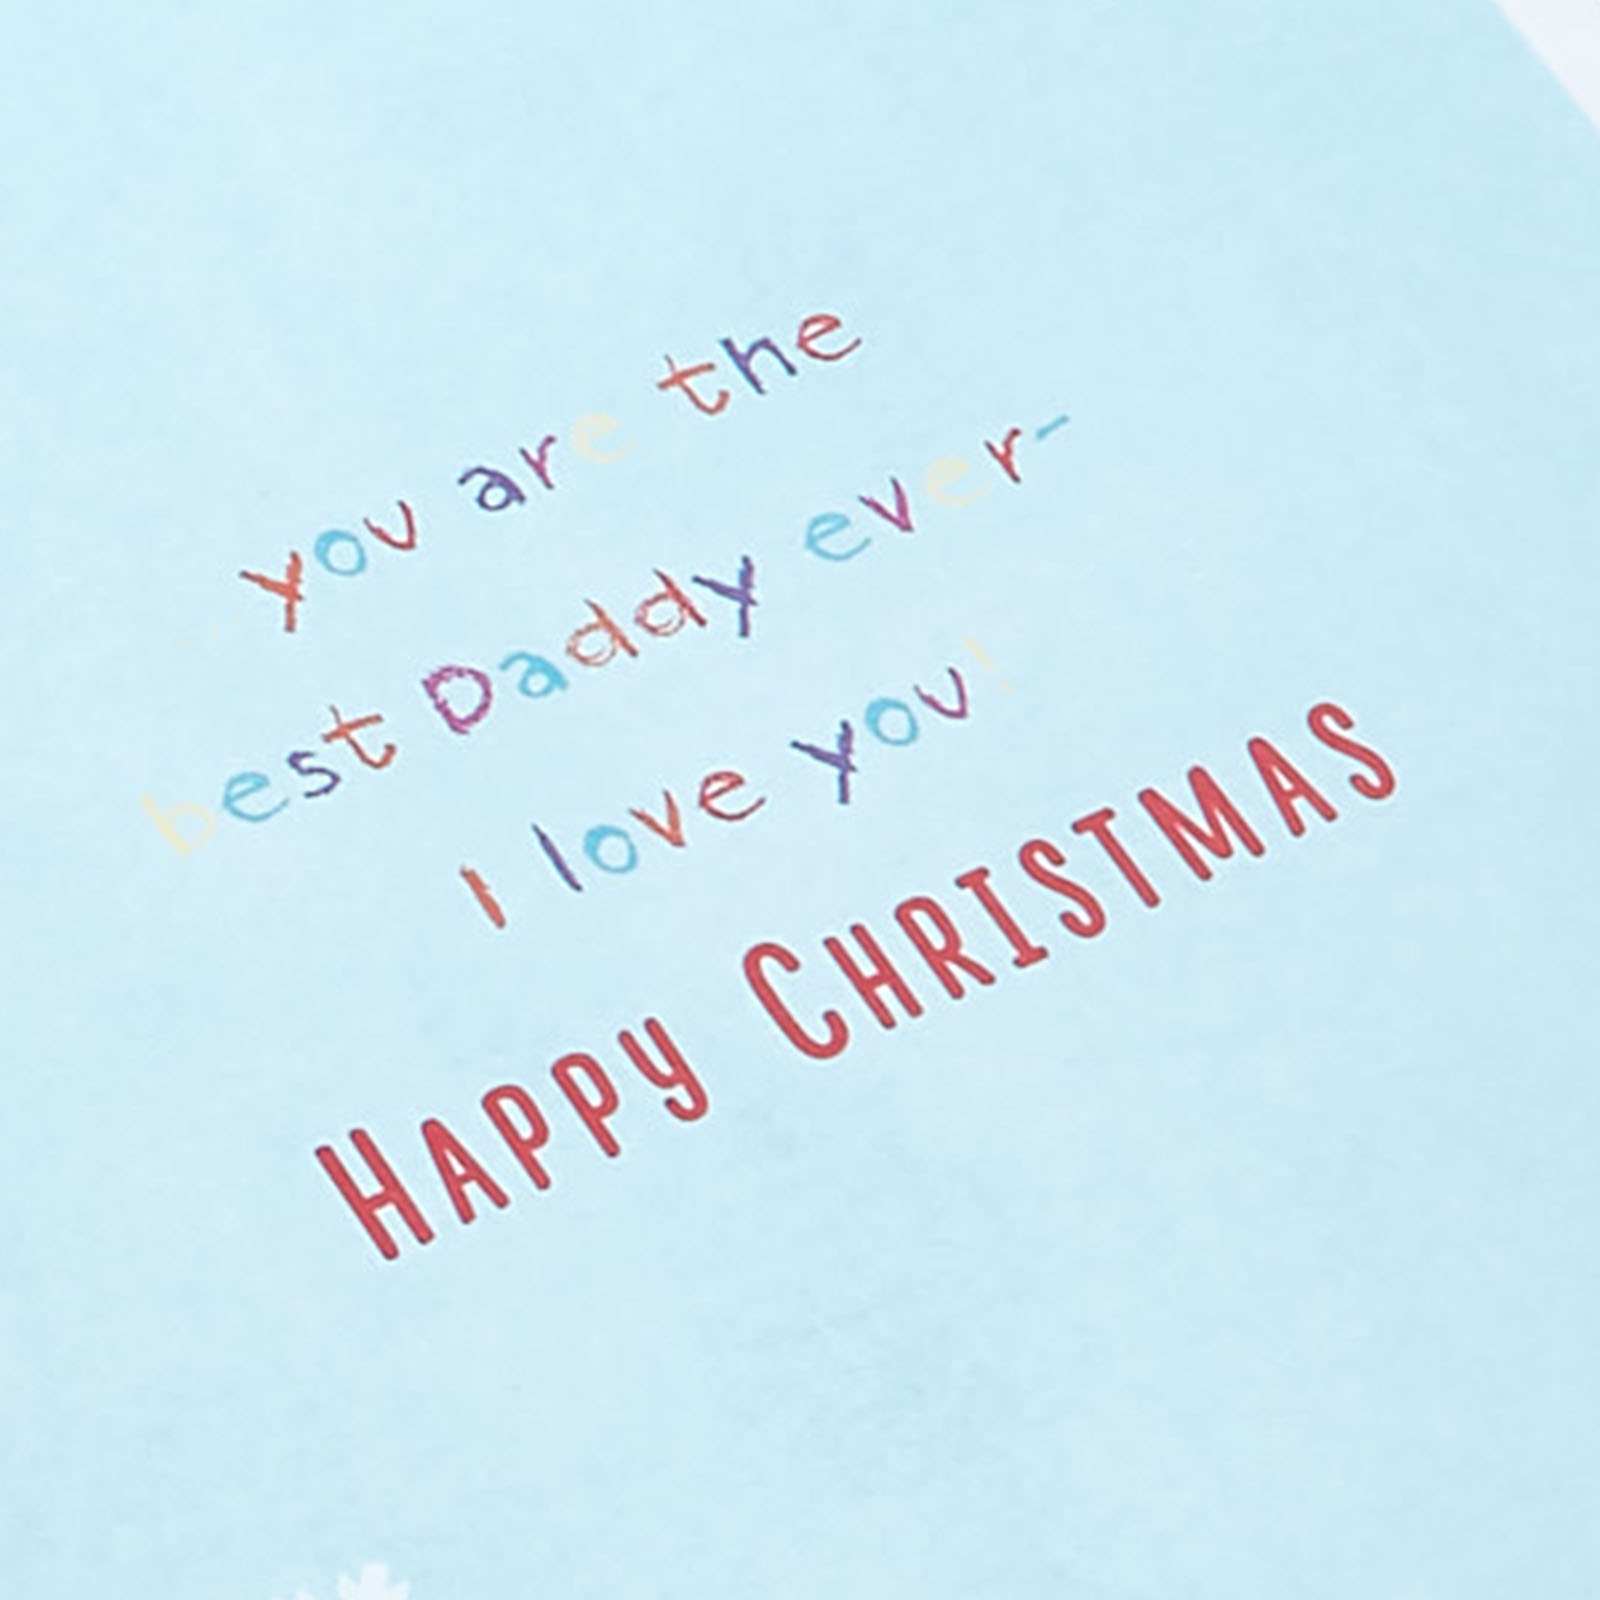 Christmas Card - For A Very Special Daddy